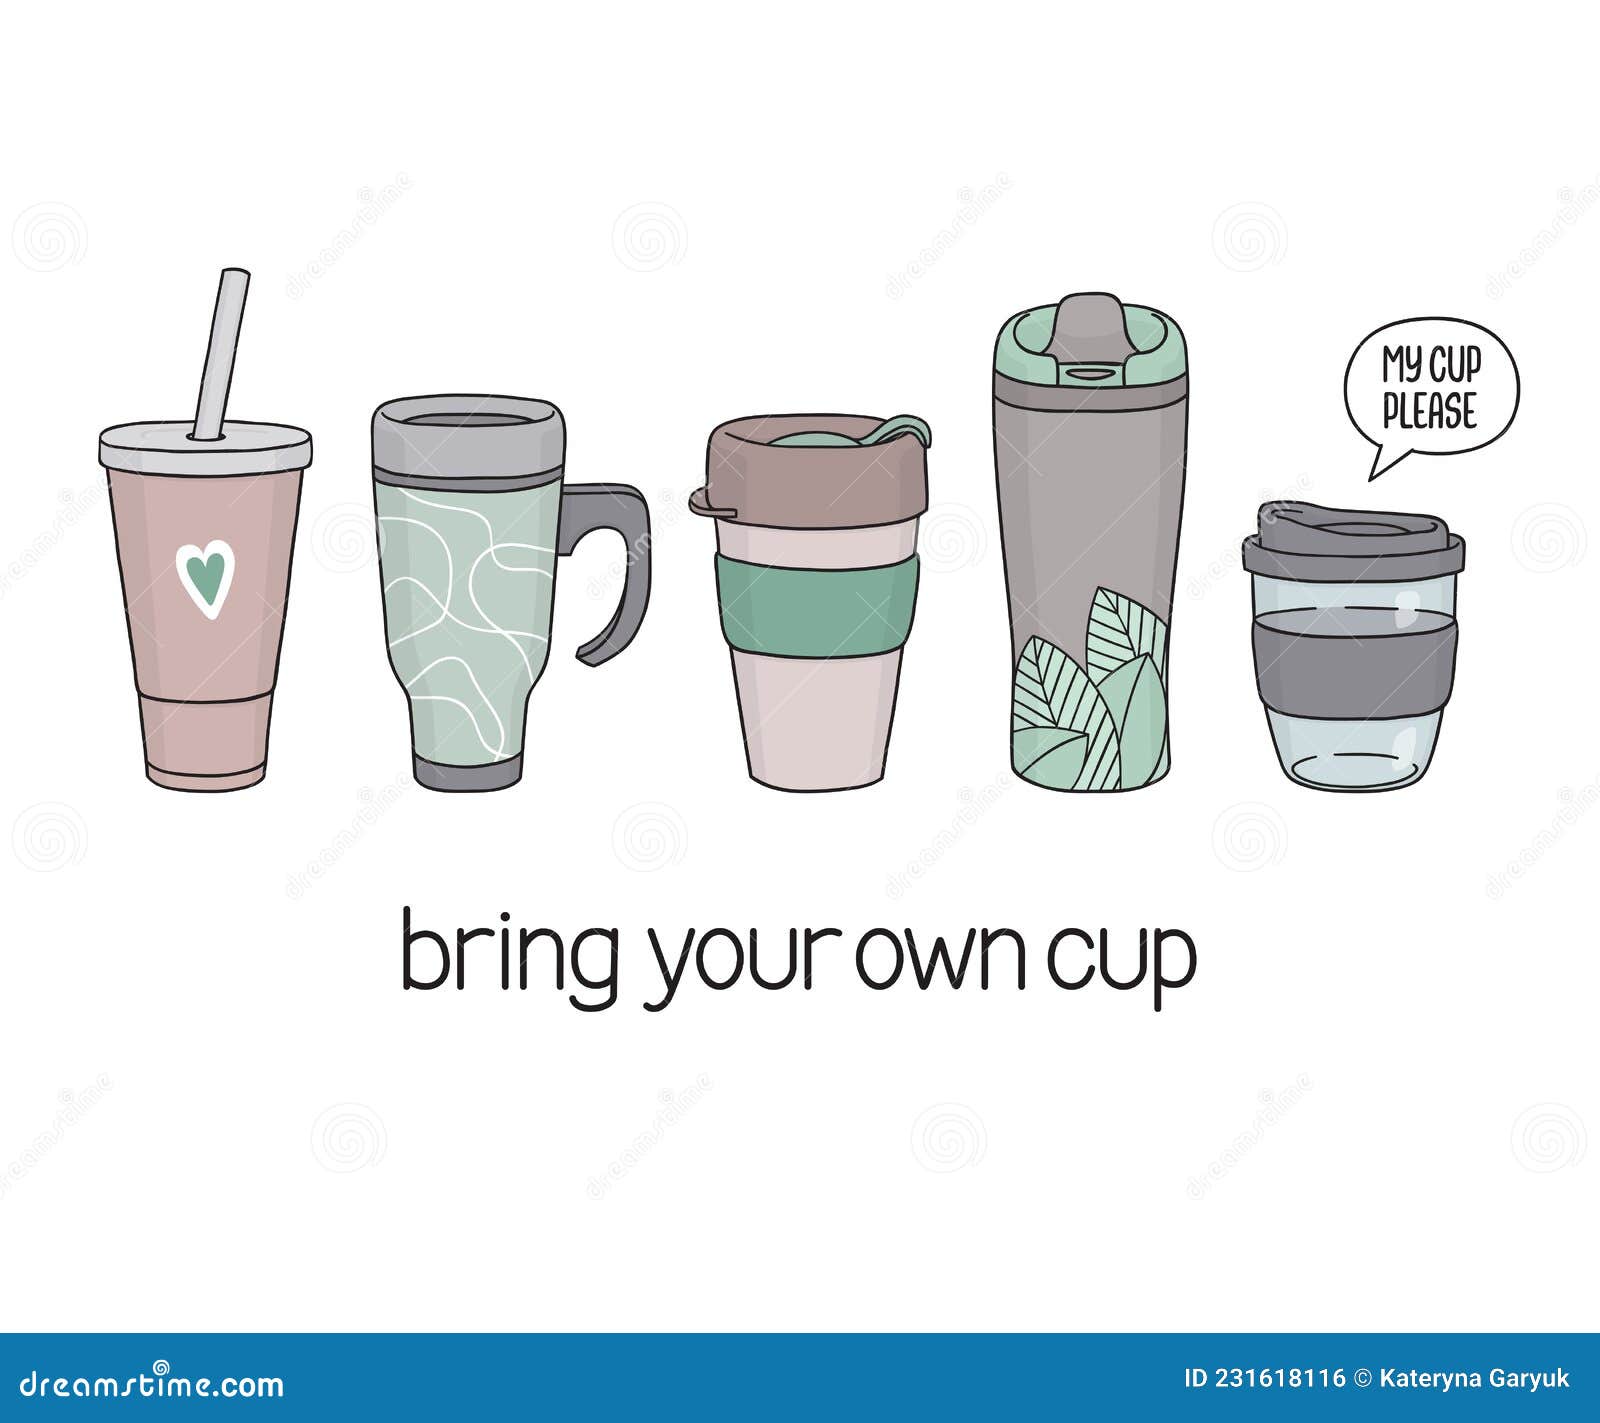 https://thumbs.dreamstime.com/z/bring-your-own-cup-set-hand-drawn-reusable-cups-drinks-to-go-speech-bubble-my-please-phrase-slogan-waste-tips-231618116.jpg